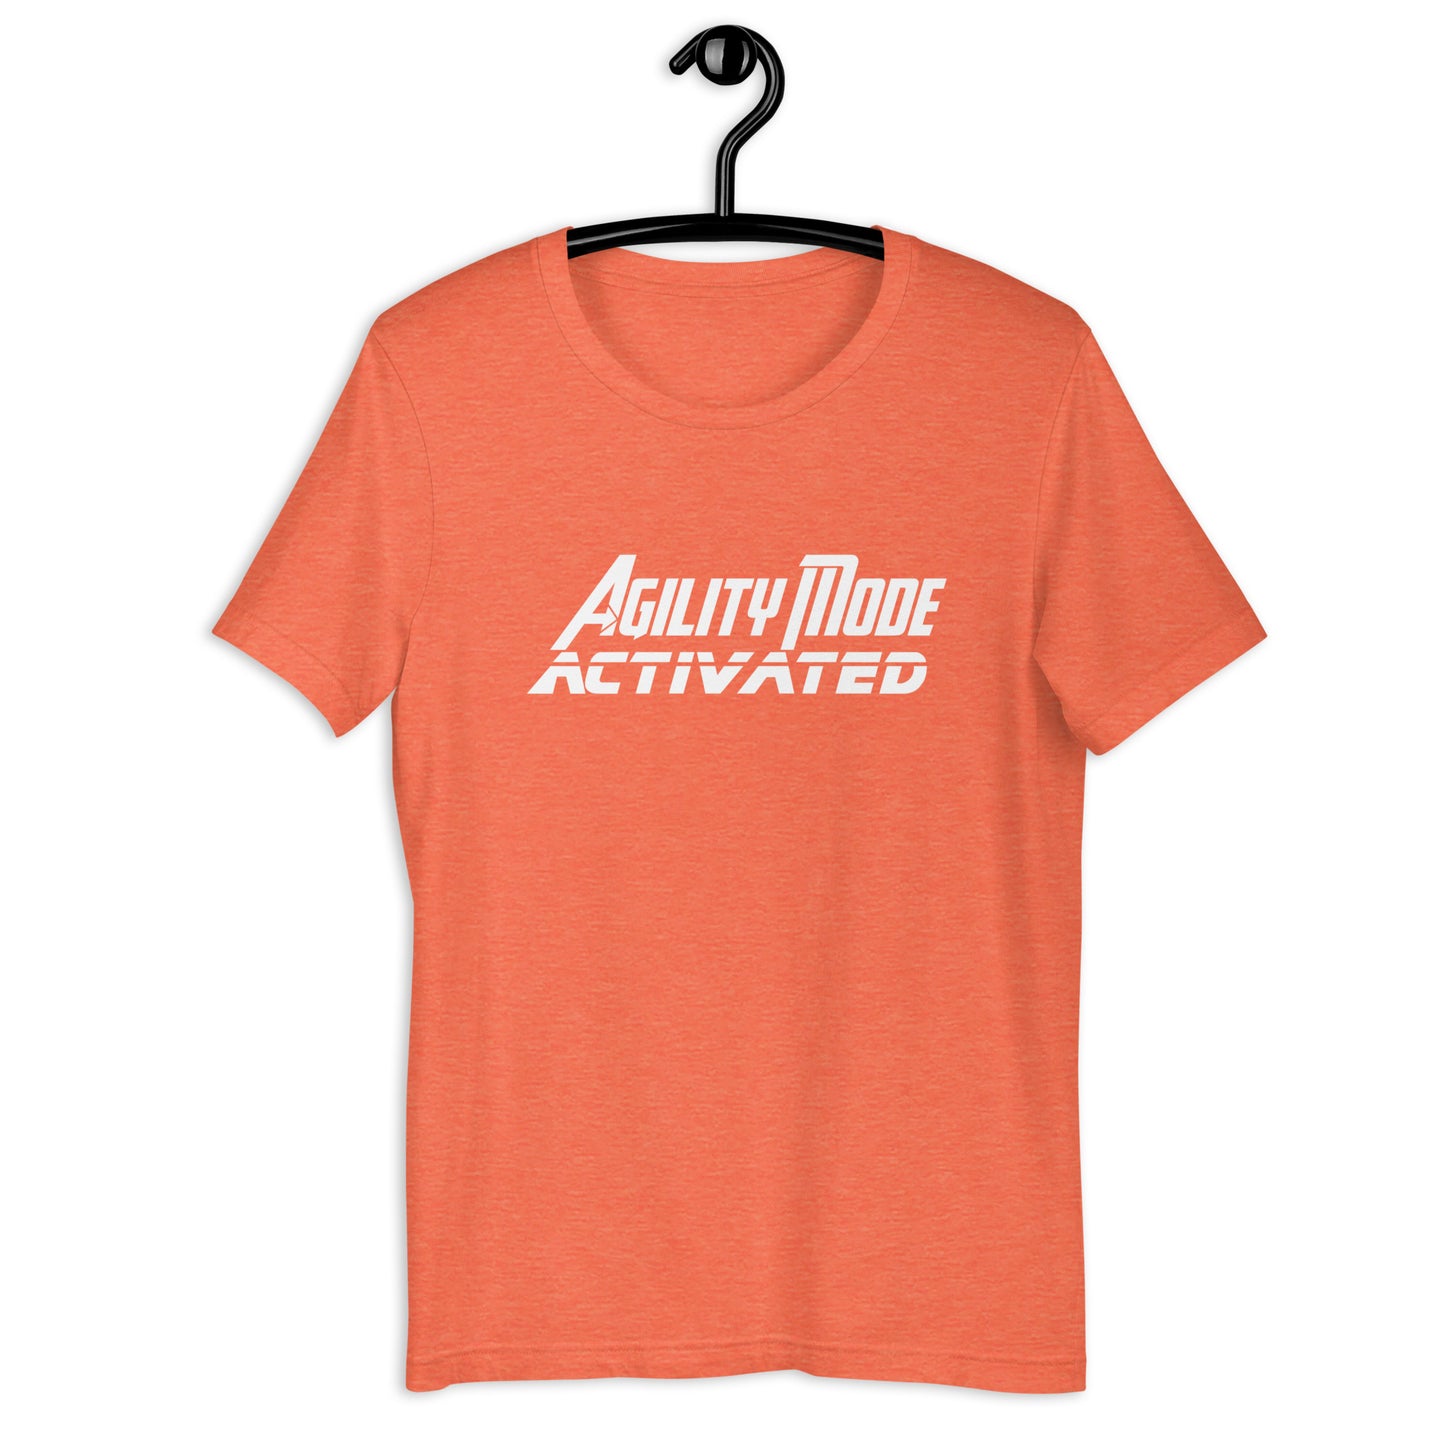 AGILITY MODE ACTIVATED - Unisex t-shirt